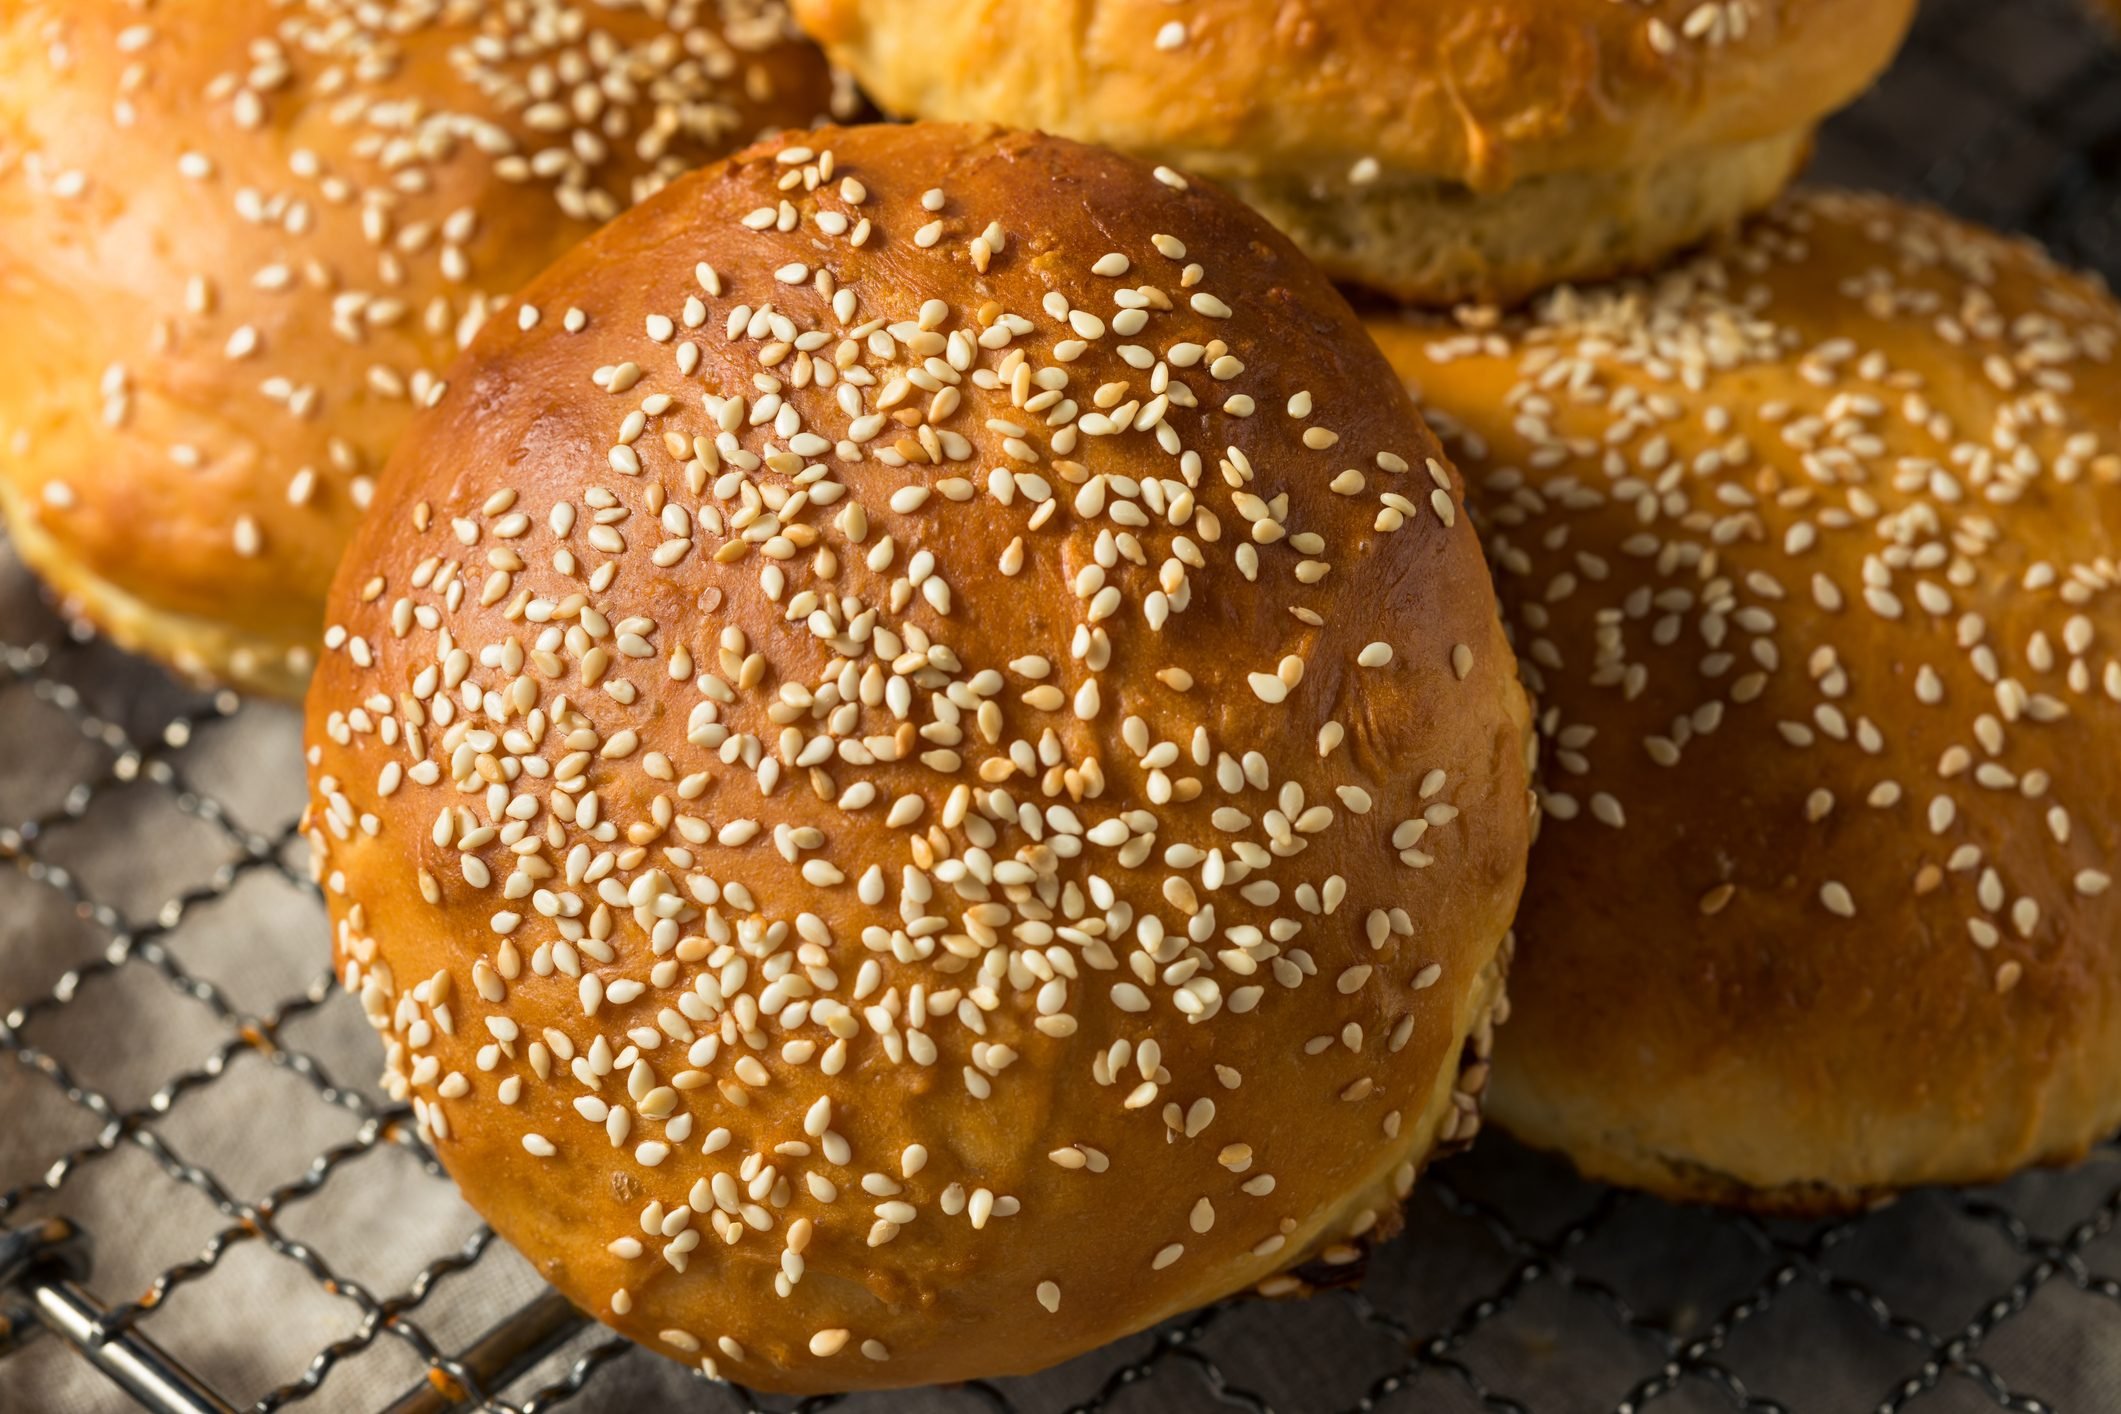 Sesame Joins the FDA's Major Food Allergens List—Here's What to Know